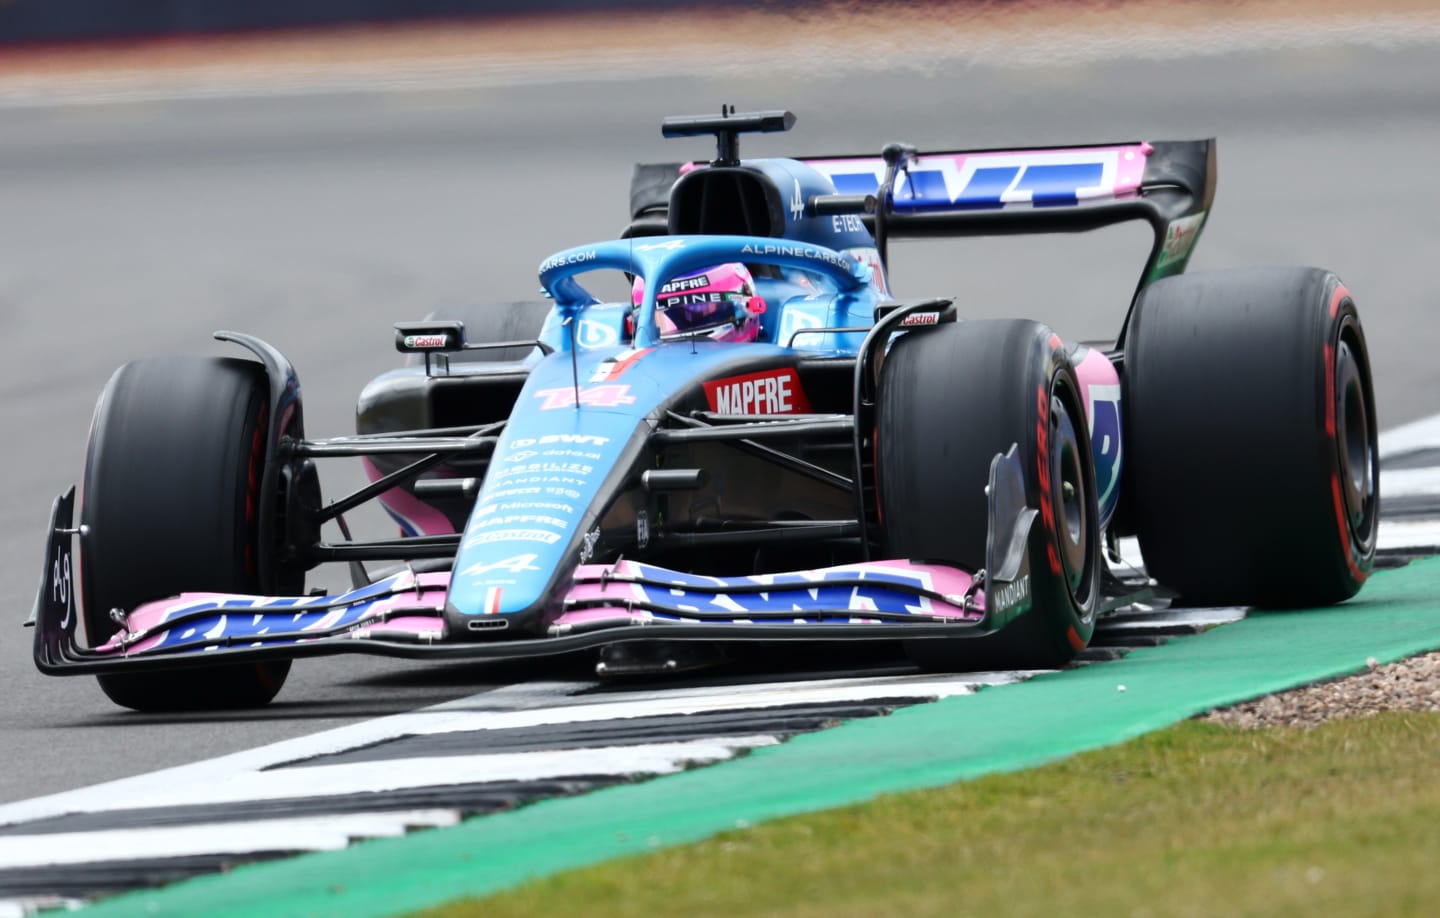 NORTHAMPTON, ENGLAND - JULY 02: Fernando Alonso of Spain driving the (14) Alpine F1 A522 Renault on track during final practice ahead of the F1 Grand Prix of Great Britain at Silverstone on July 02, 2022 in Northampton, England. (Photo by Clive Rose/Getty Images)